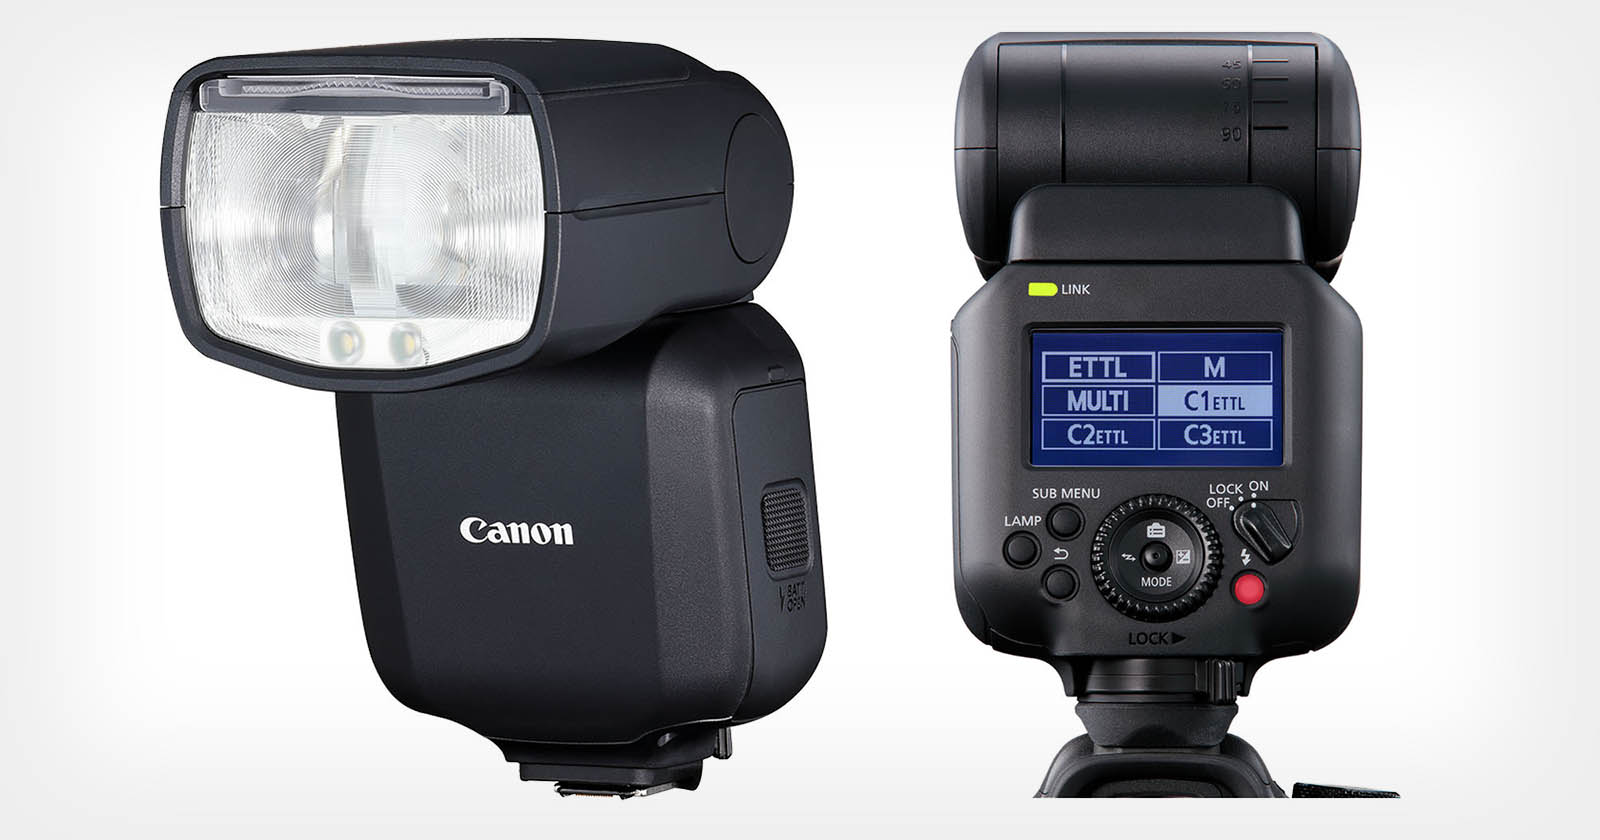 Canon’s New Speedlite EL-5 is the First Flash Made for EOS R Mirrorless